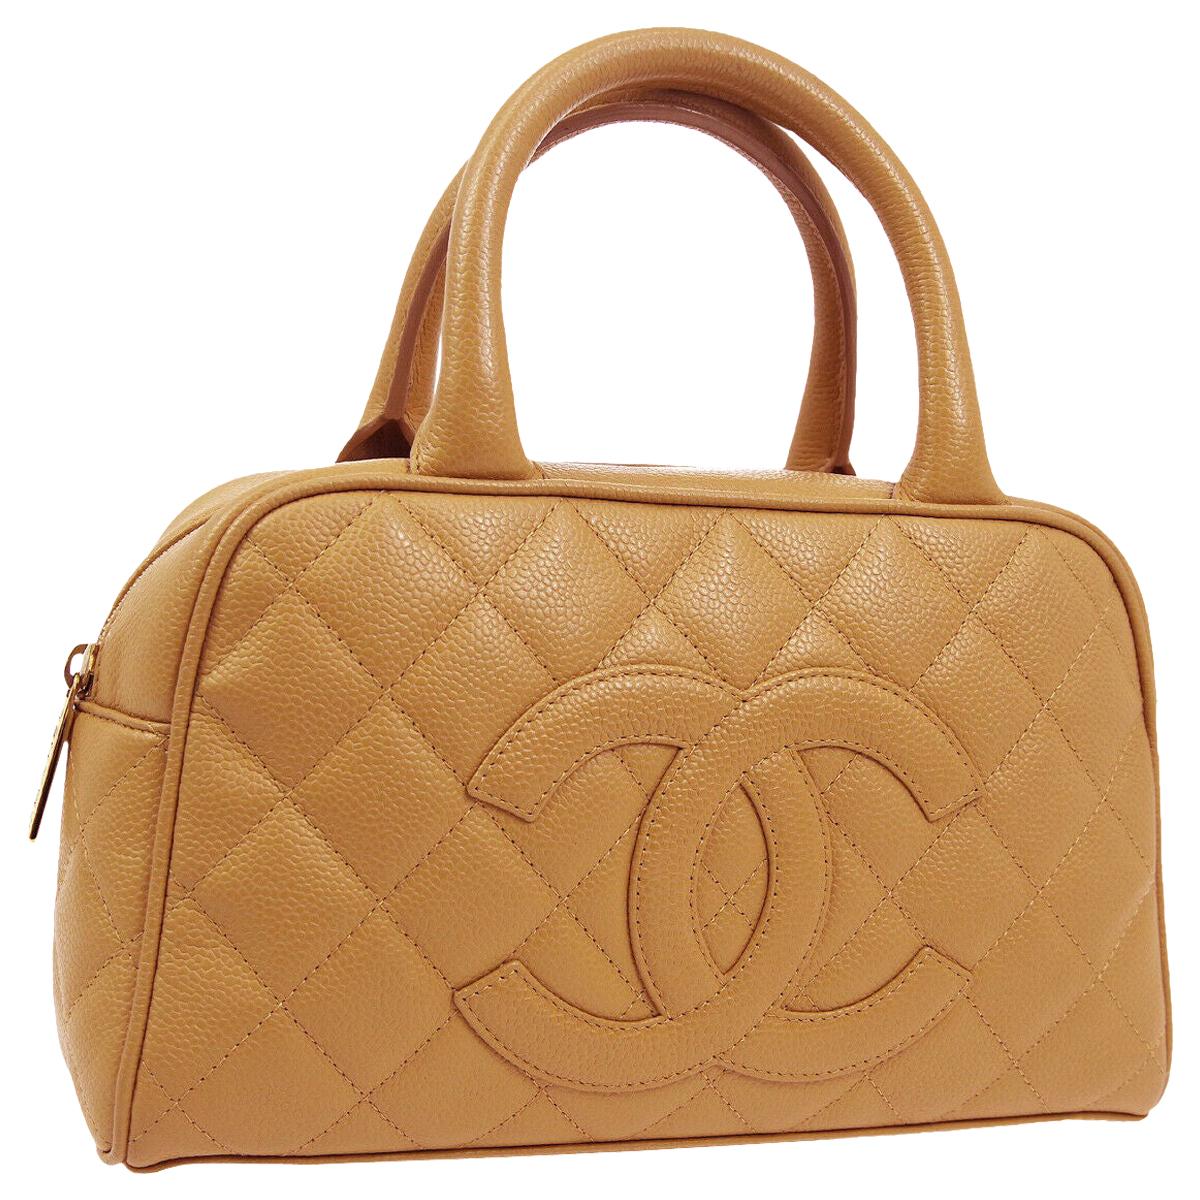 Chanel Nude Tan Leather Gold Boston Small Top Handle Satchel Bag